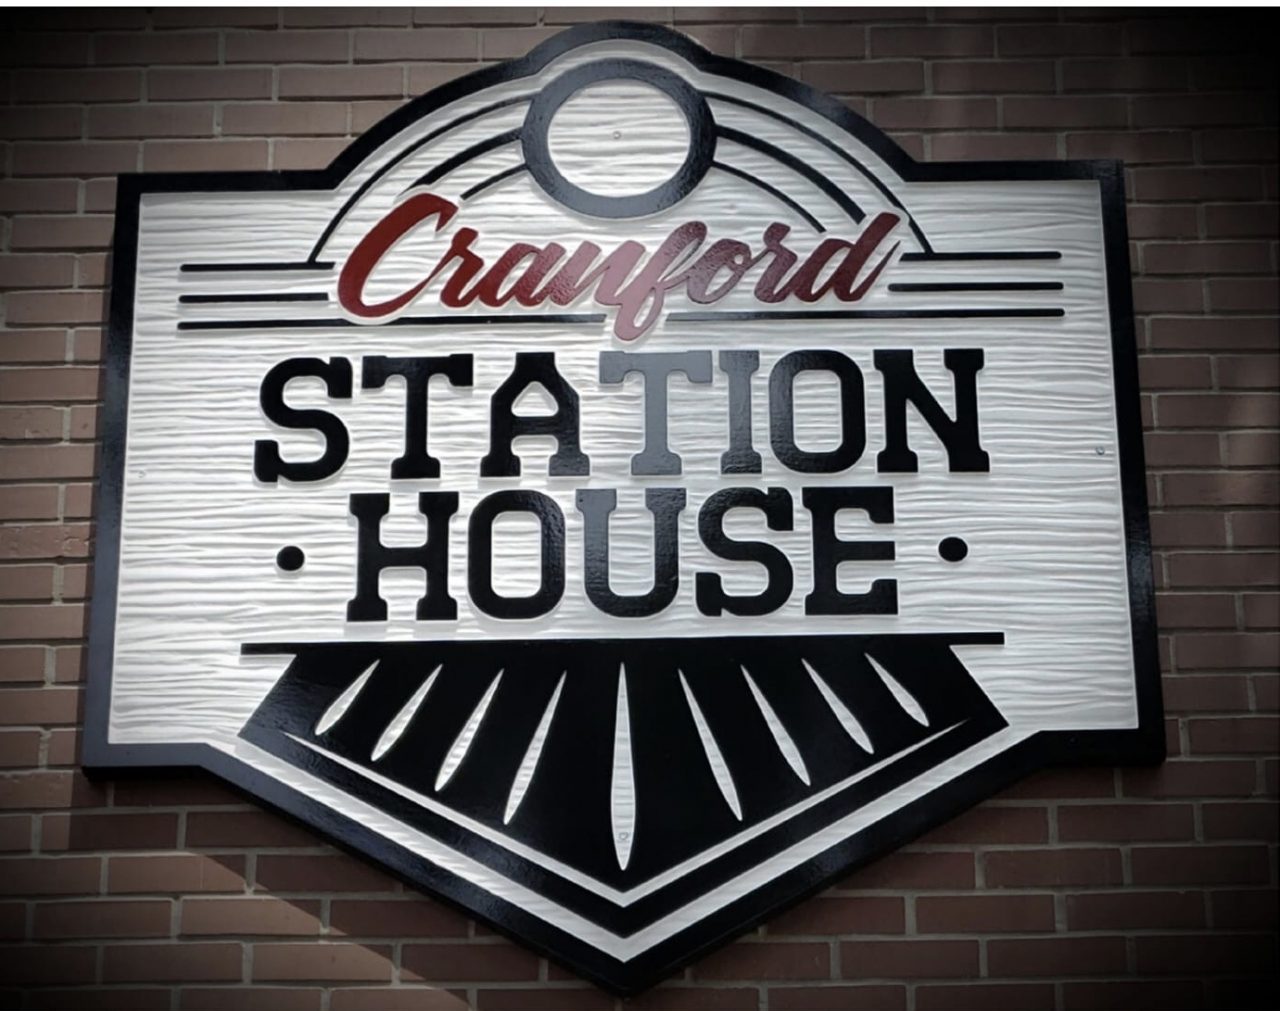 Cranford Station House, The Cranford Station House Officially Opens on Monday, July 8, 2019!